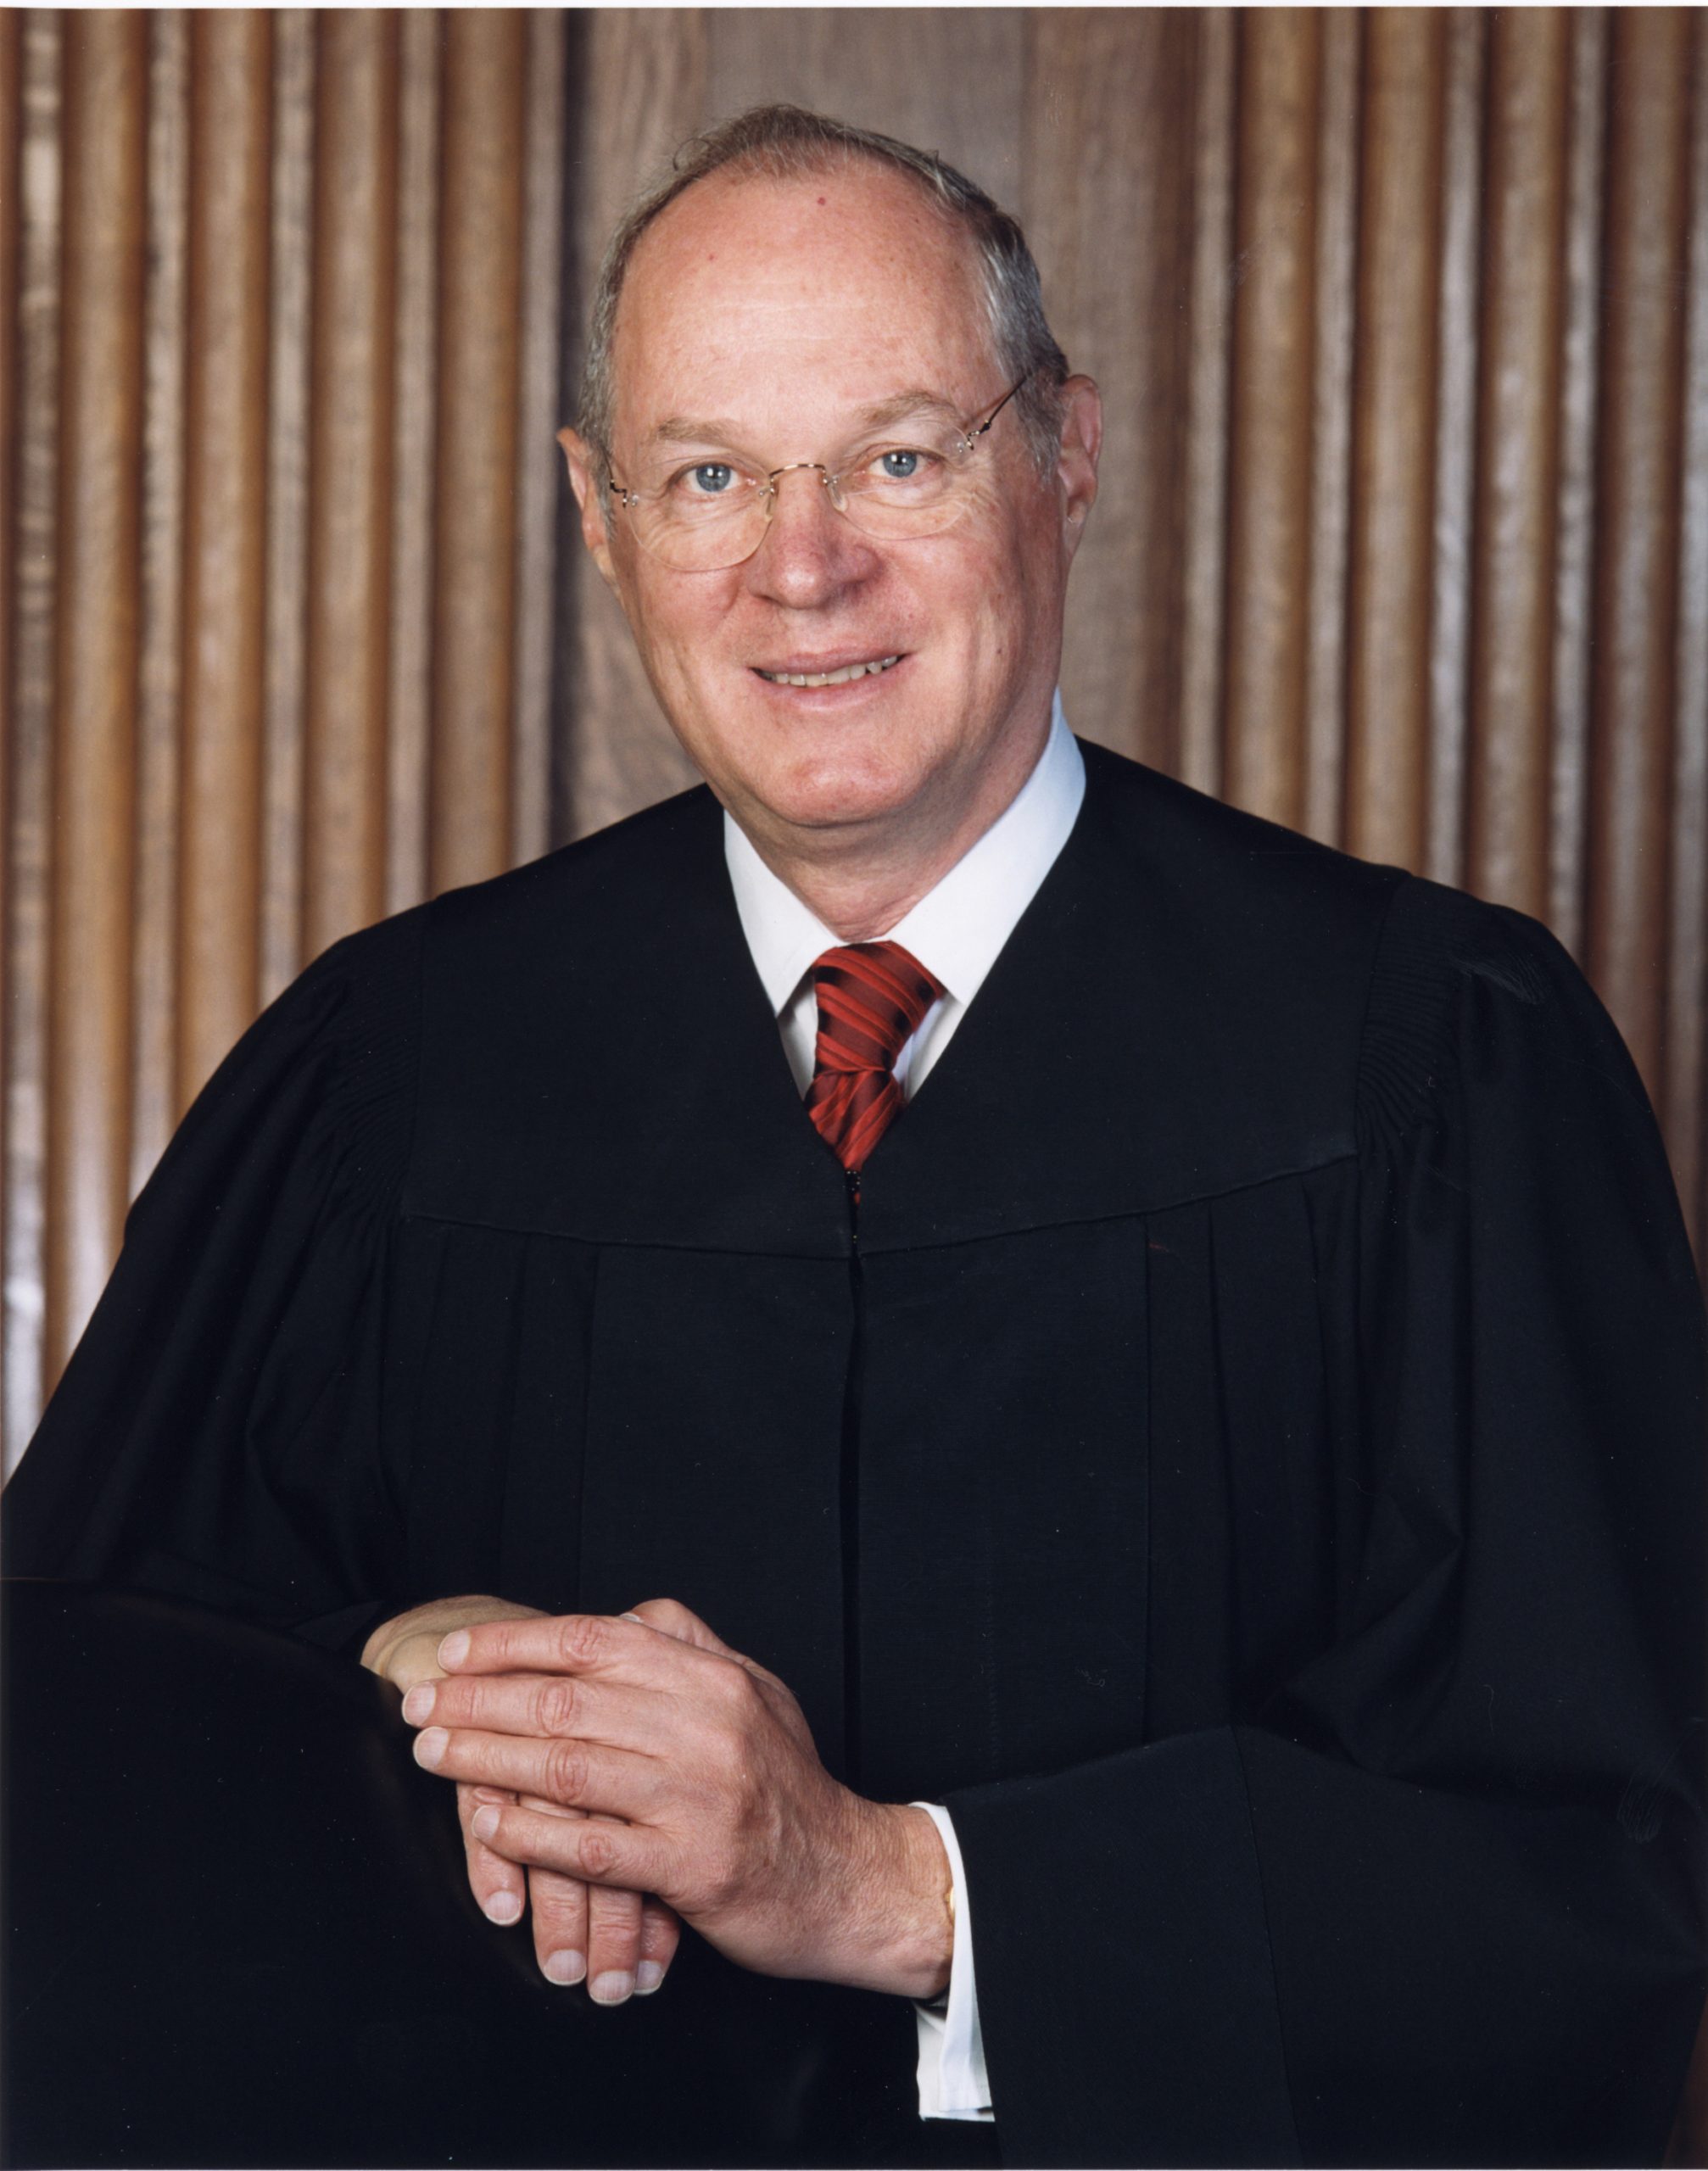 A man in a robe looks at the camera, smiling.